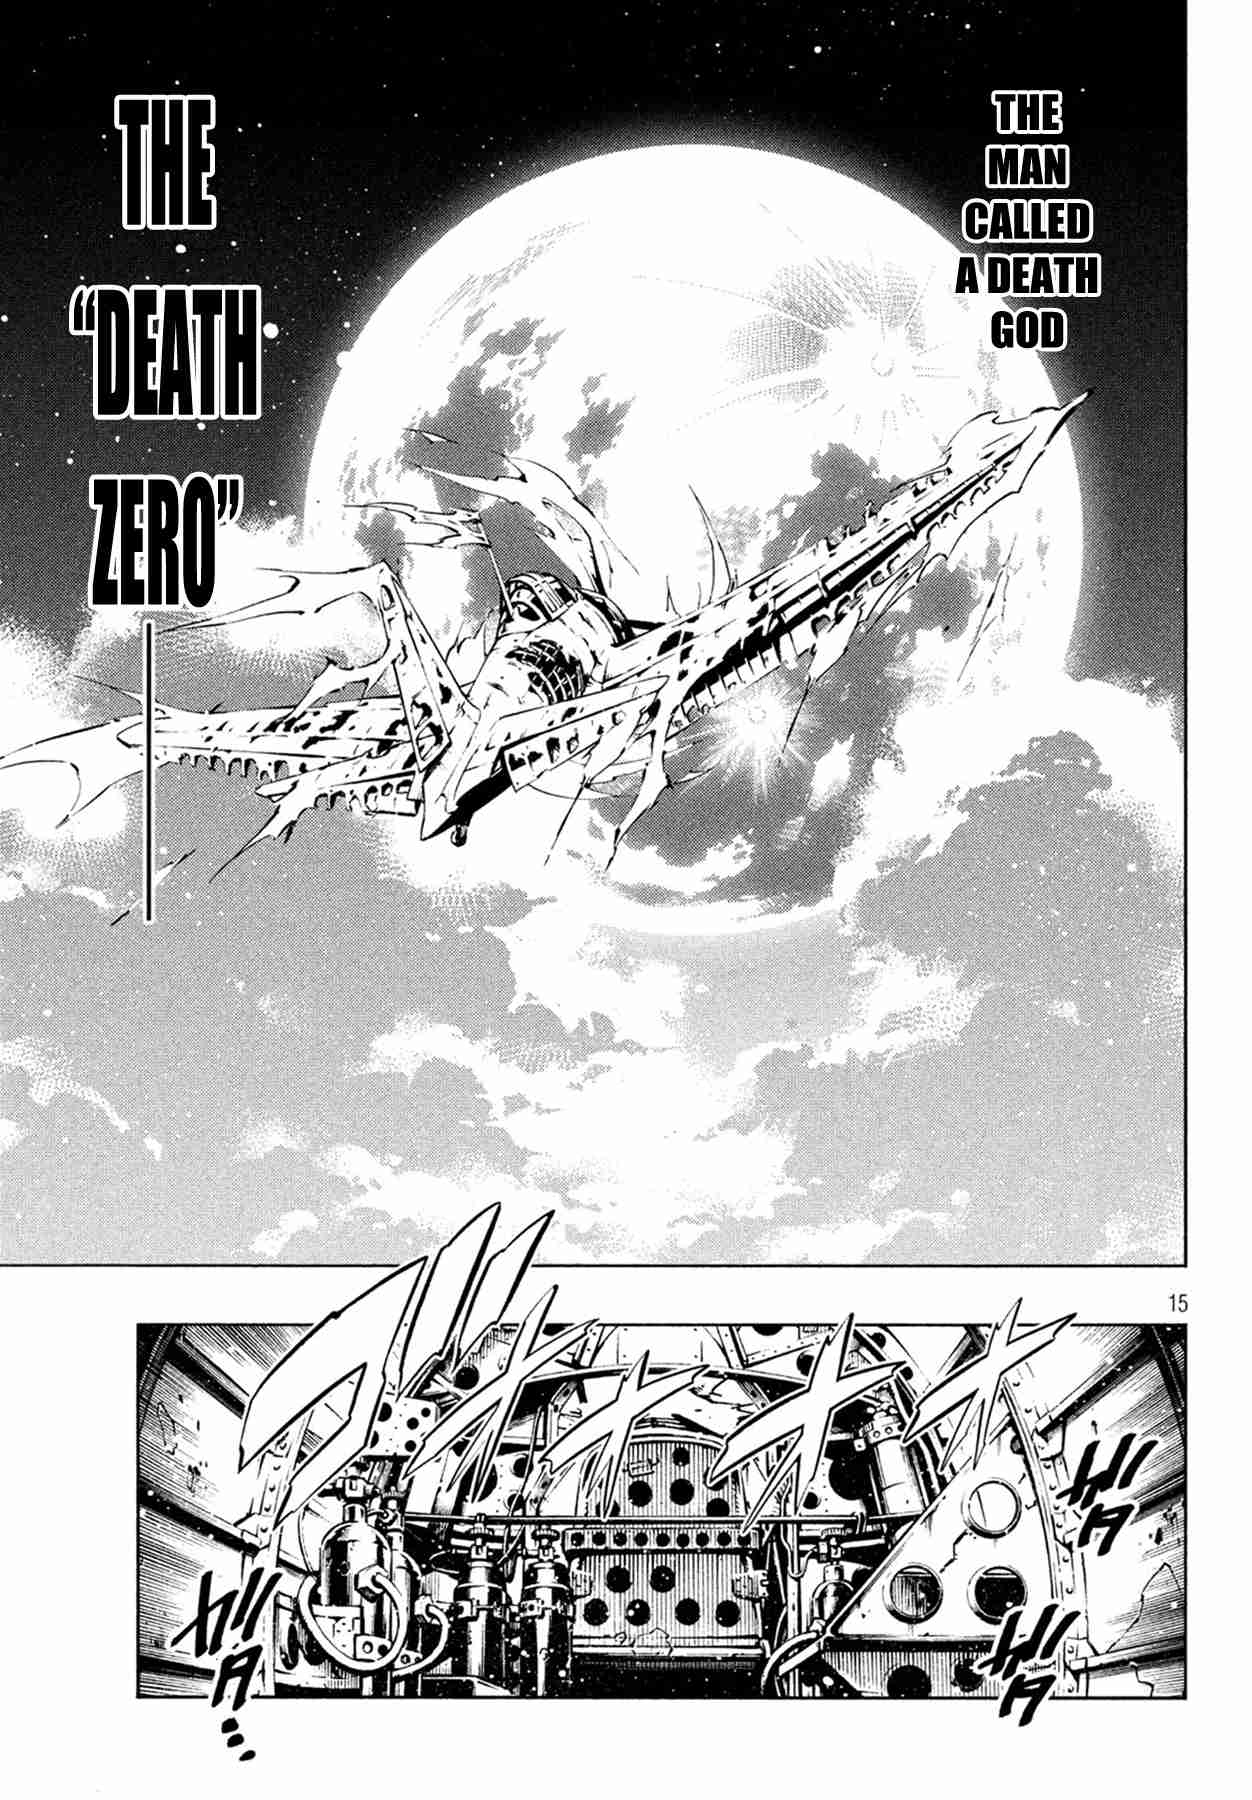 Shaman King: The Super Star Vol. 1 Ch. 6 Fight of the Zero Fighter's Departure